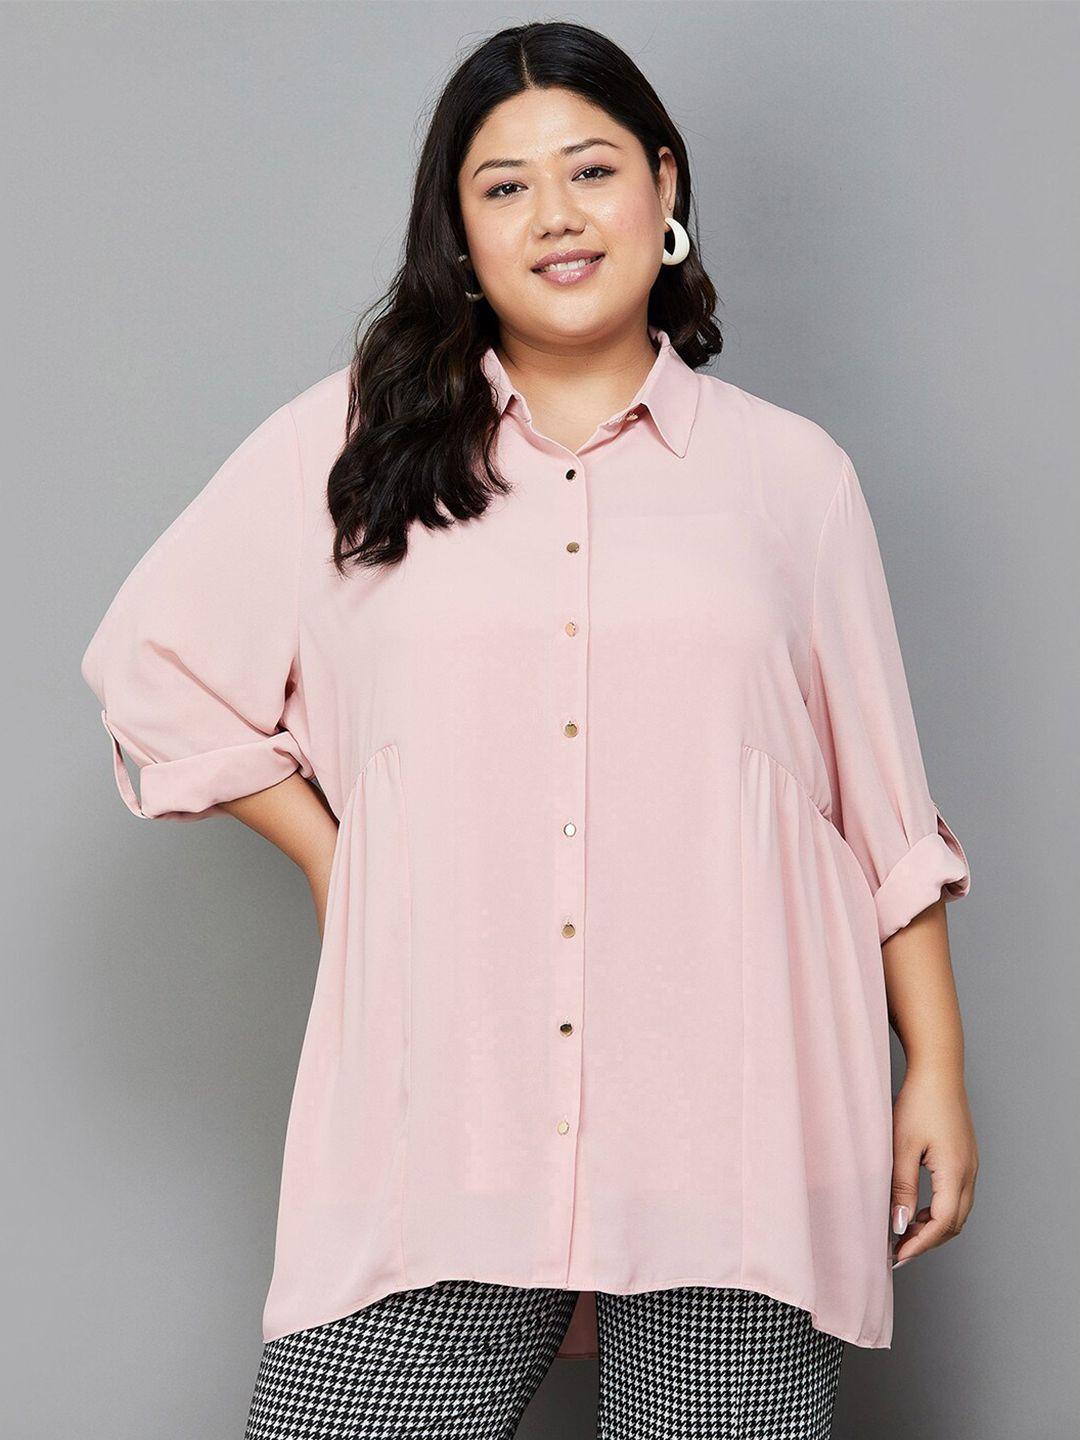 nexus by lifestyle plus size roll-up sleeves shirt style longline top